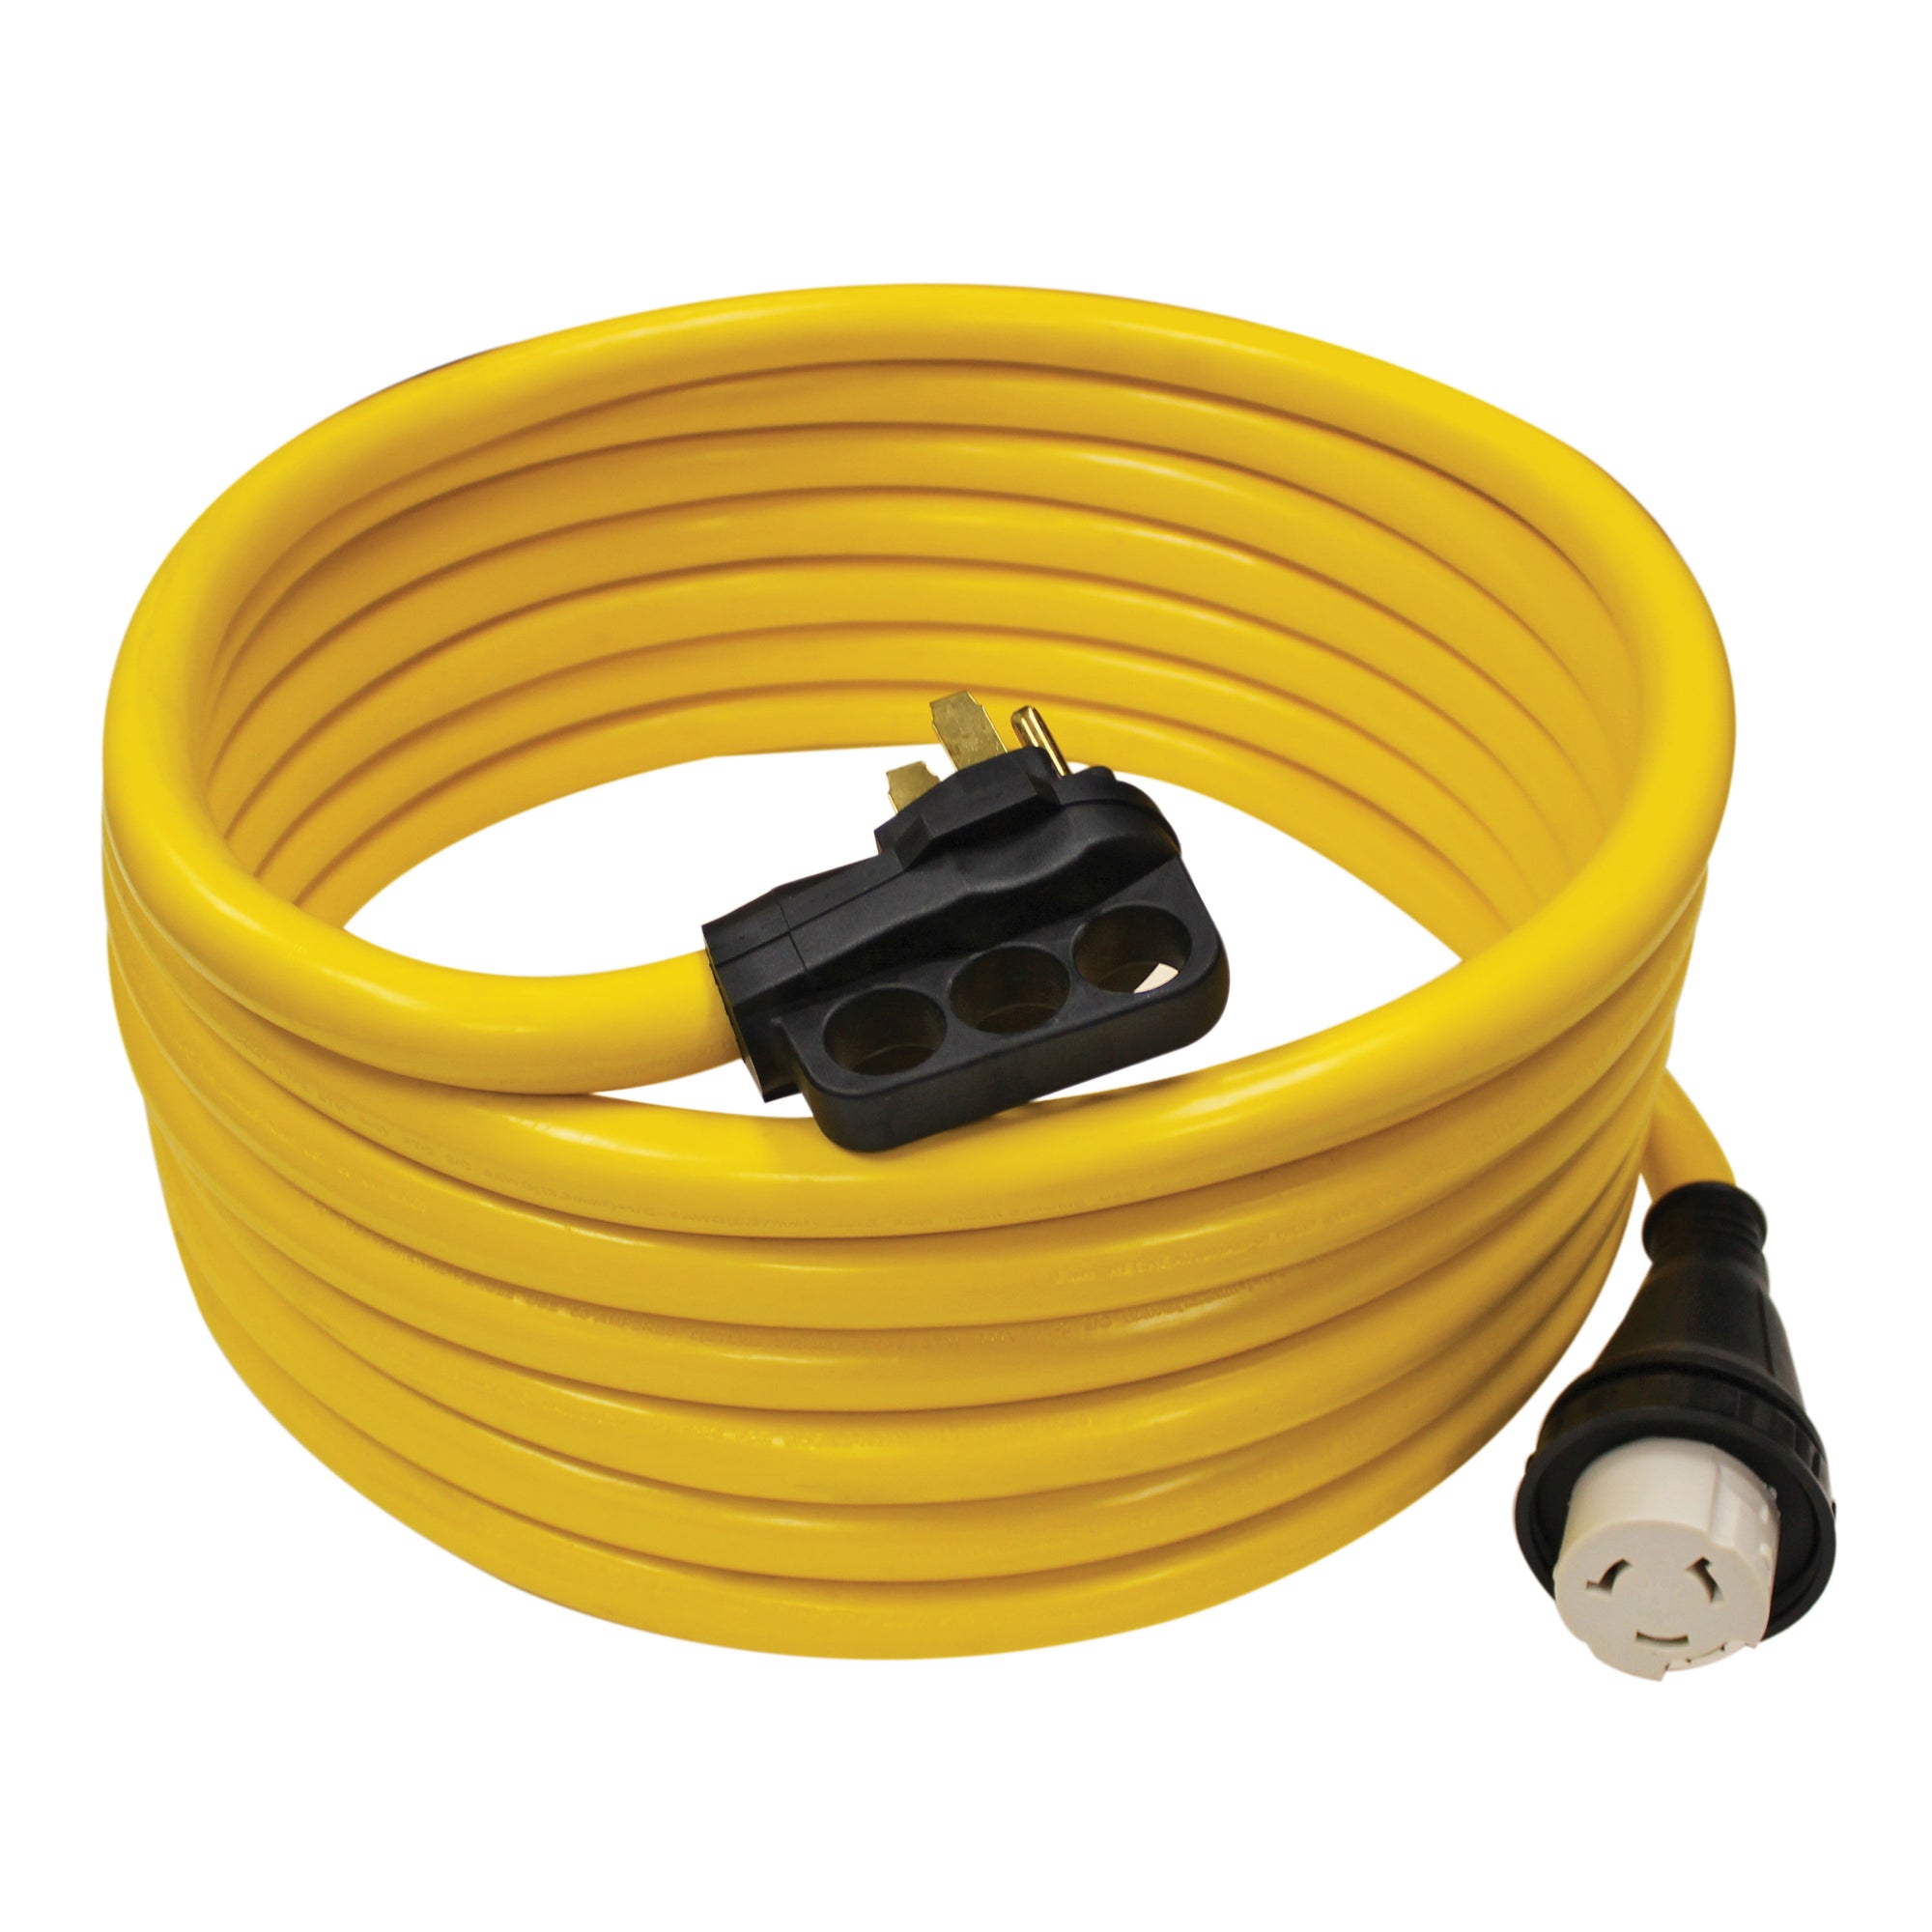 30' 50 AMP RV CORD WITH CONNECTOR PLUG W/HANDLES